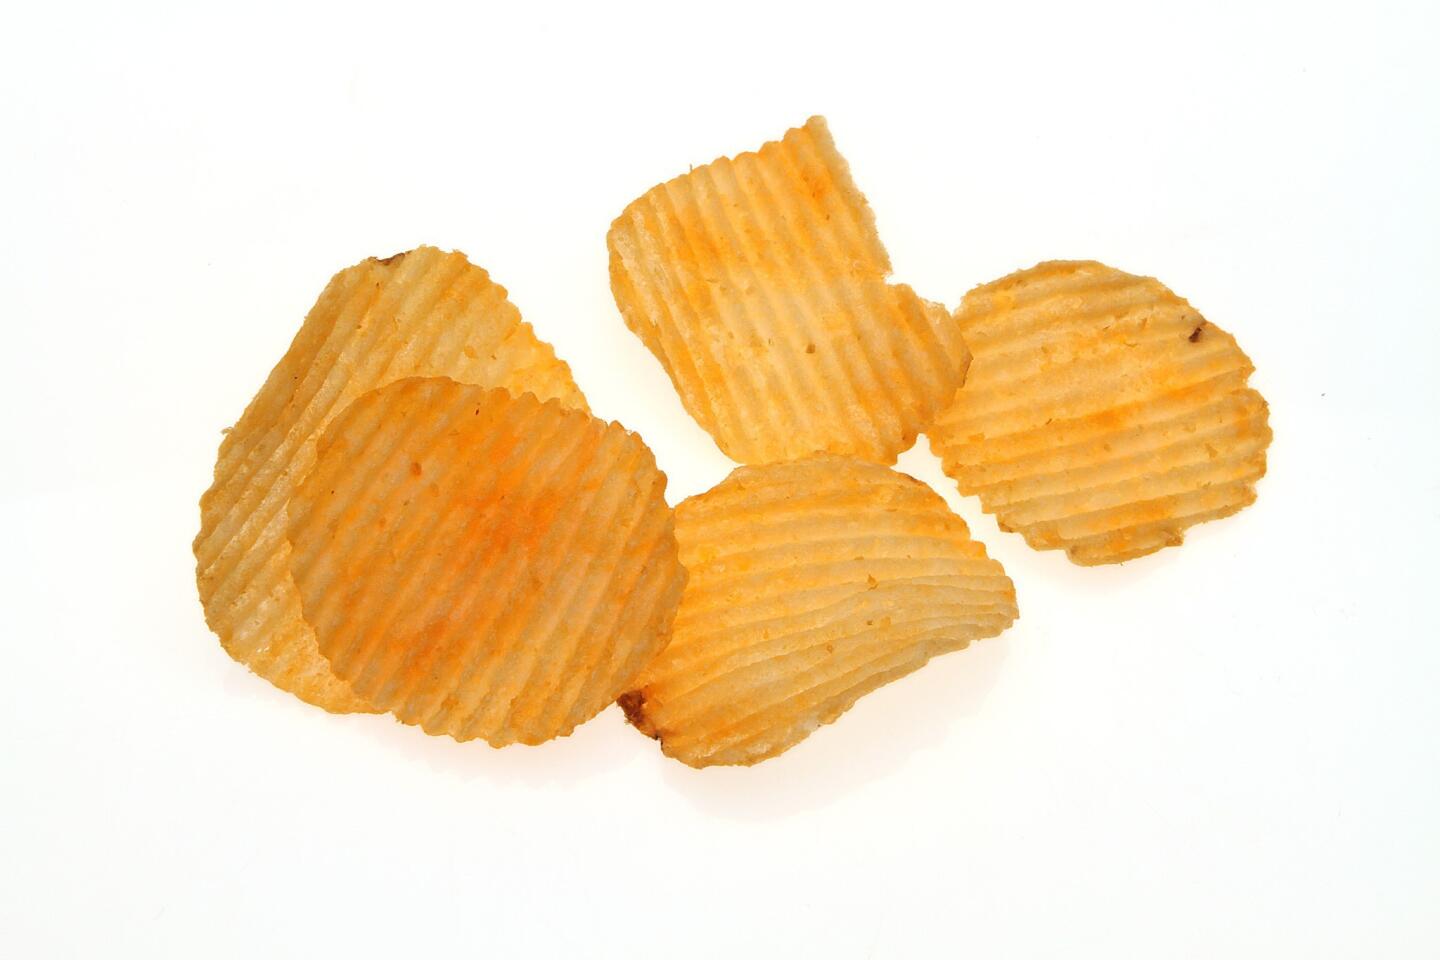 Serving size: 11 chips Sodium: 180 milligrams Fat: 10 grams Carbs: 15 g Protein: 2 g Calories: 160